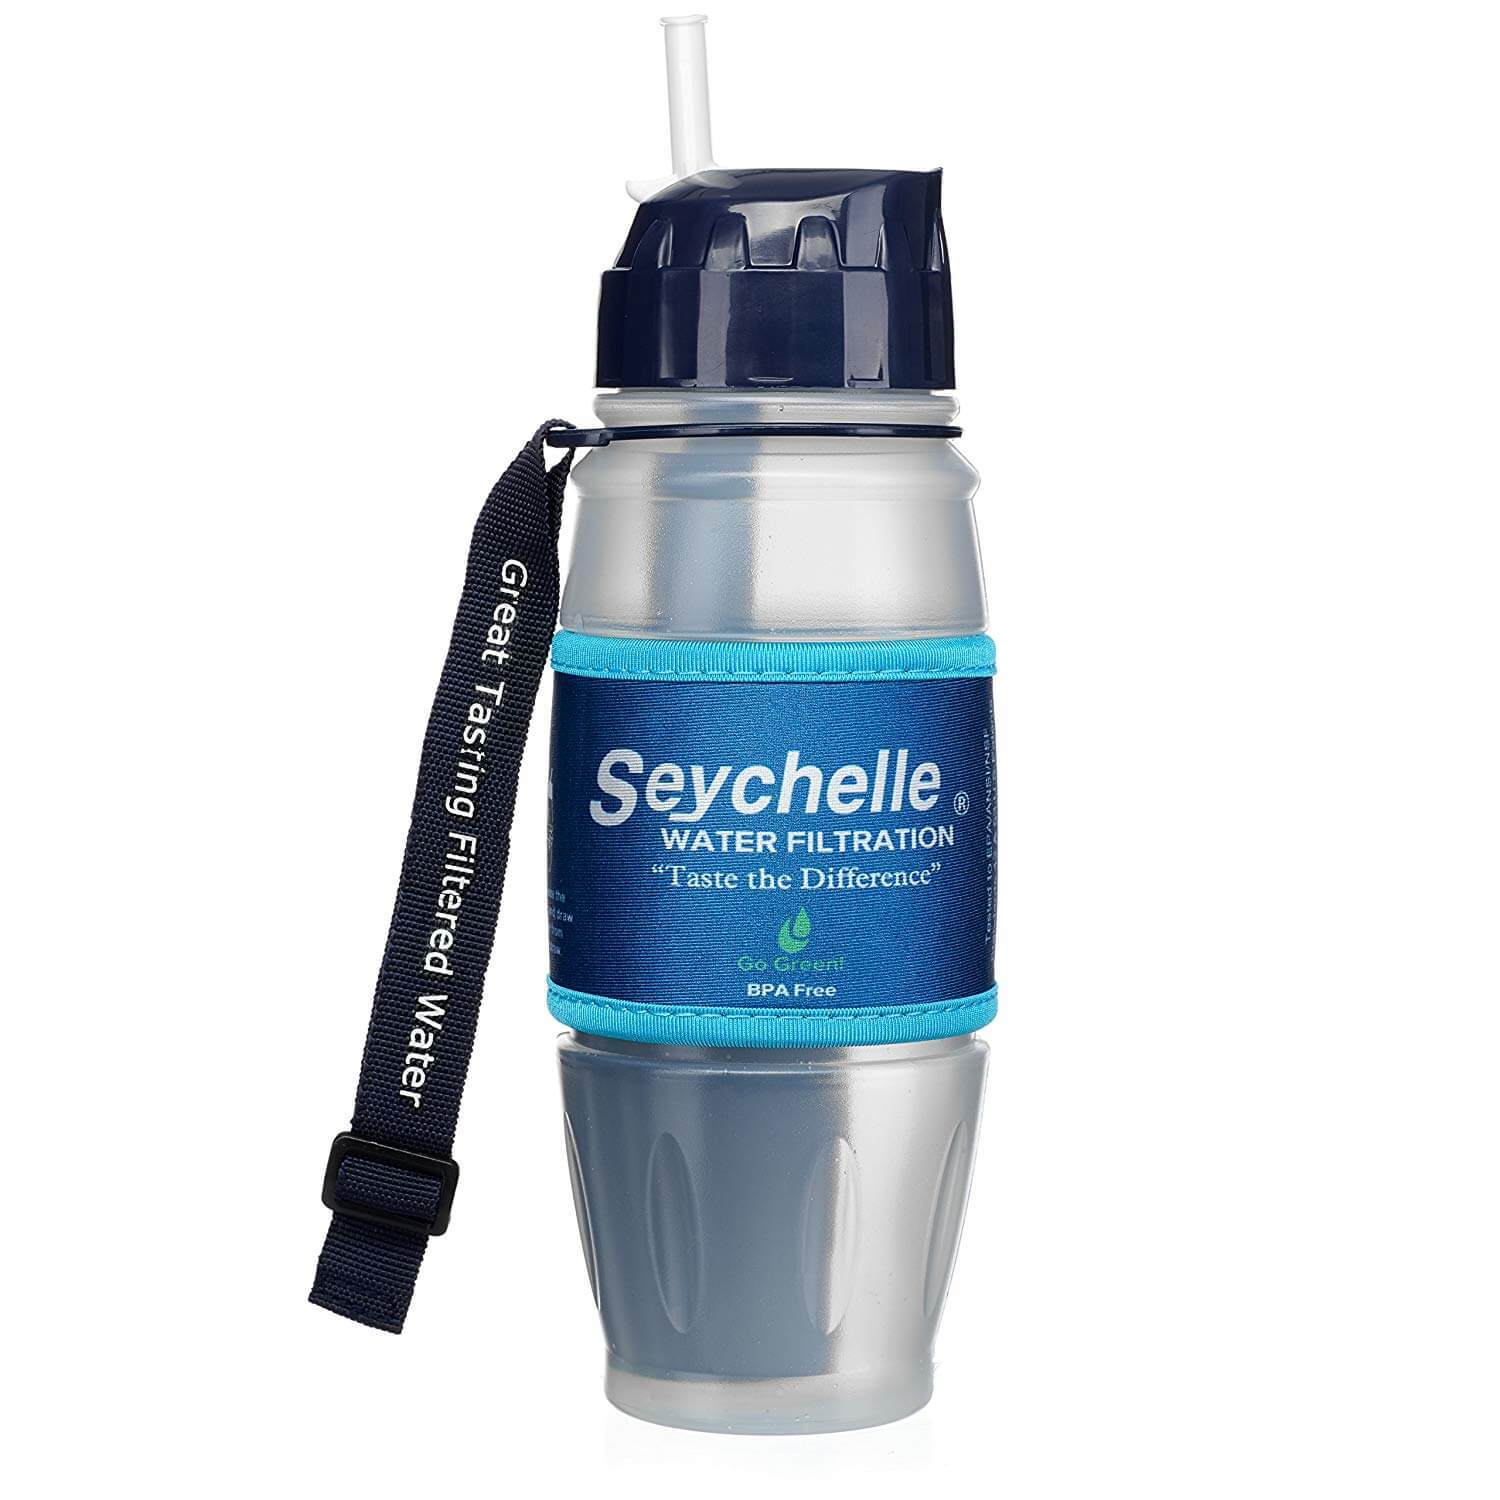 Seychelle Extreme Water Filter Bottle - Best Filtered Water Bottle for Extreme Condition